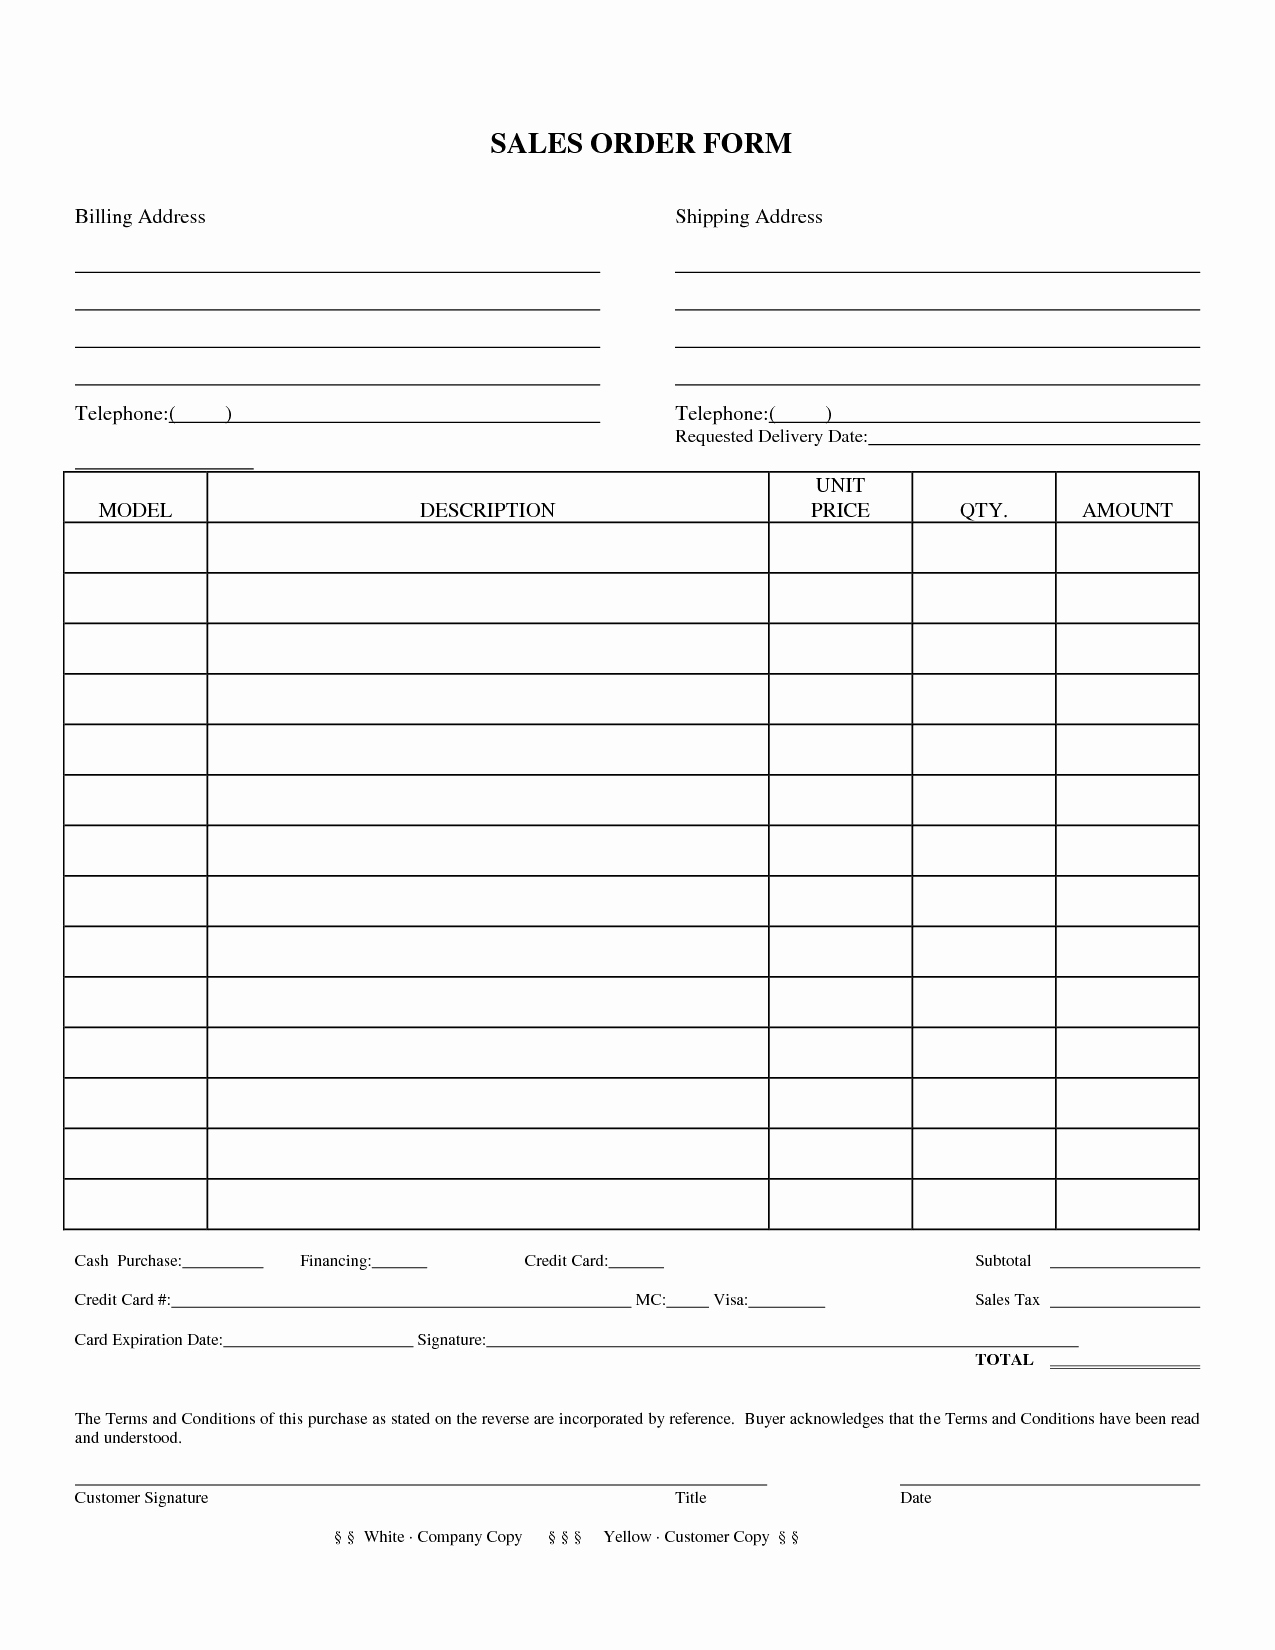 Sales order forms Templates Free Best Of Sales forms Sales order form Doc Doc